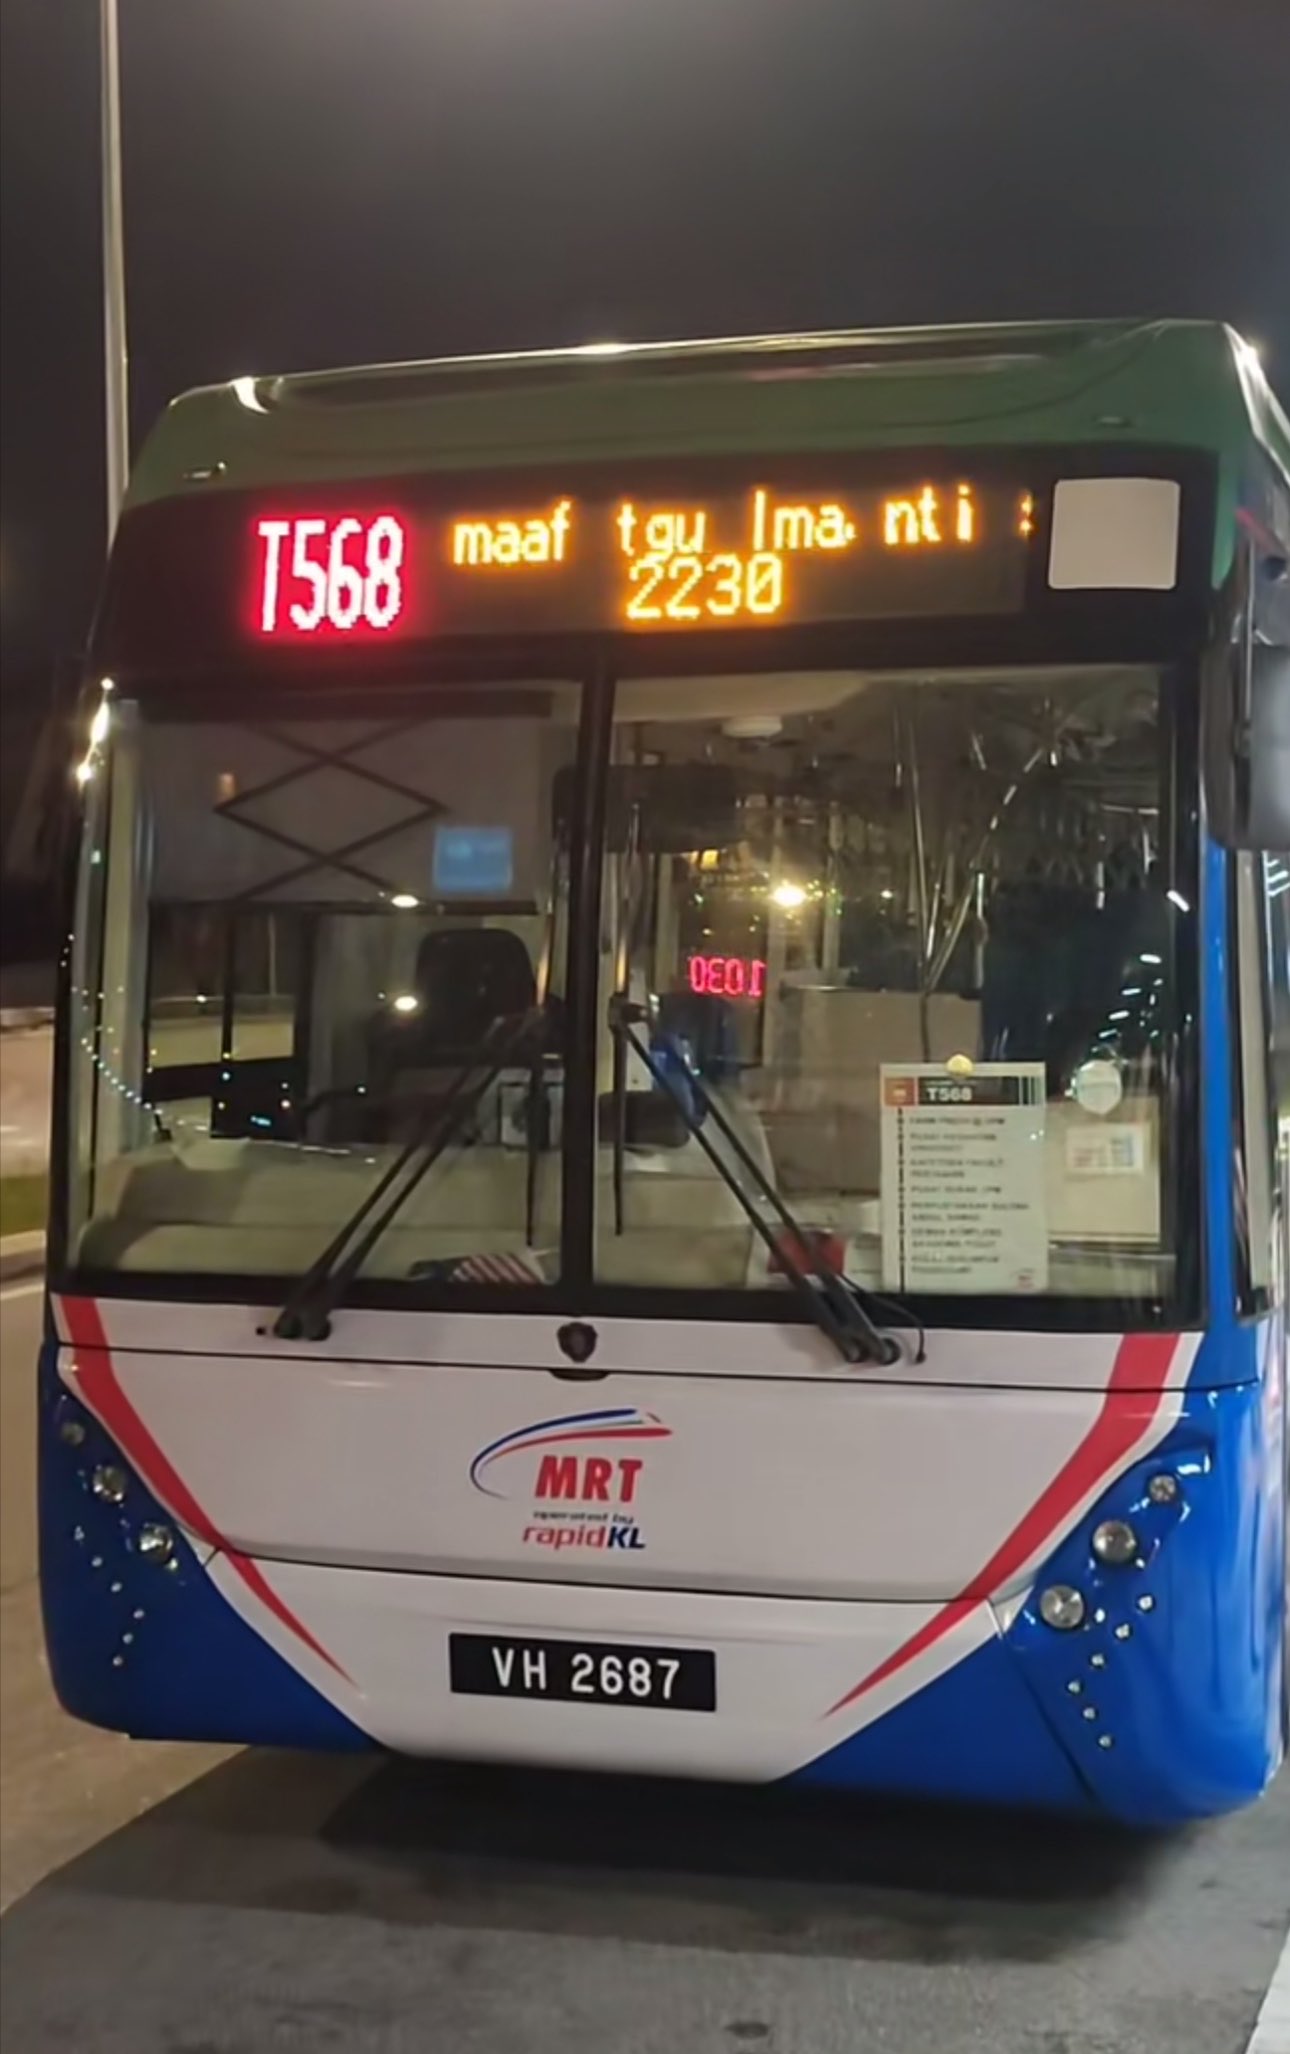 Rapid kl bus displays cute message to students who were waiting